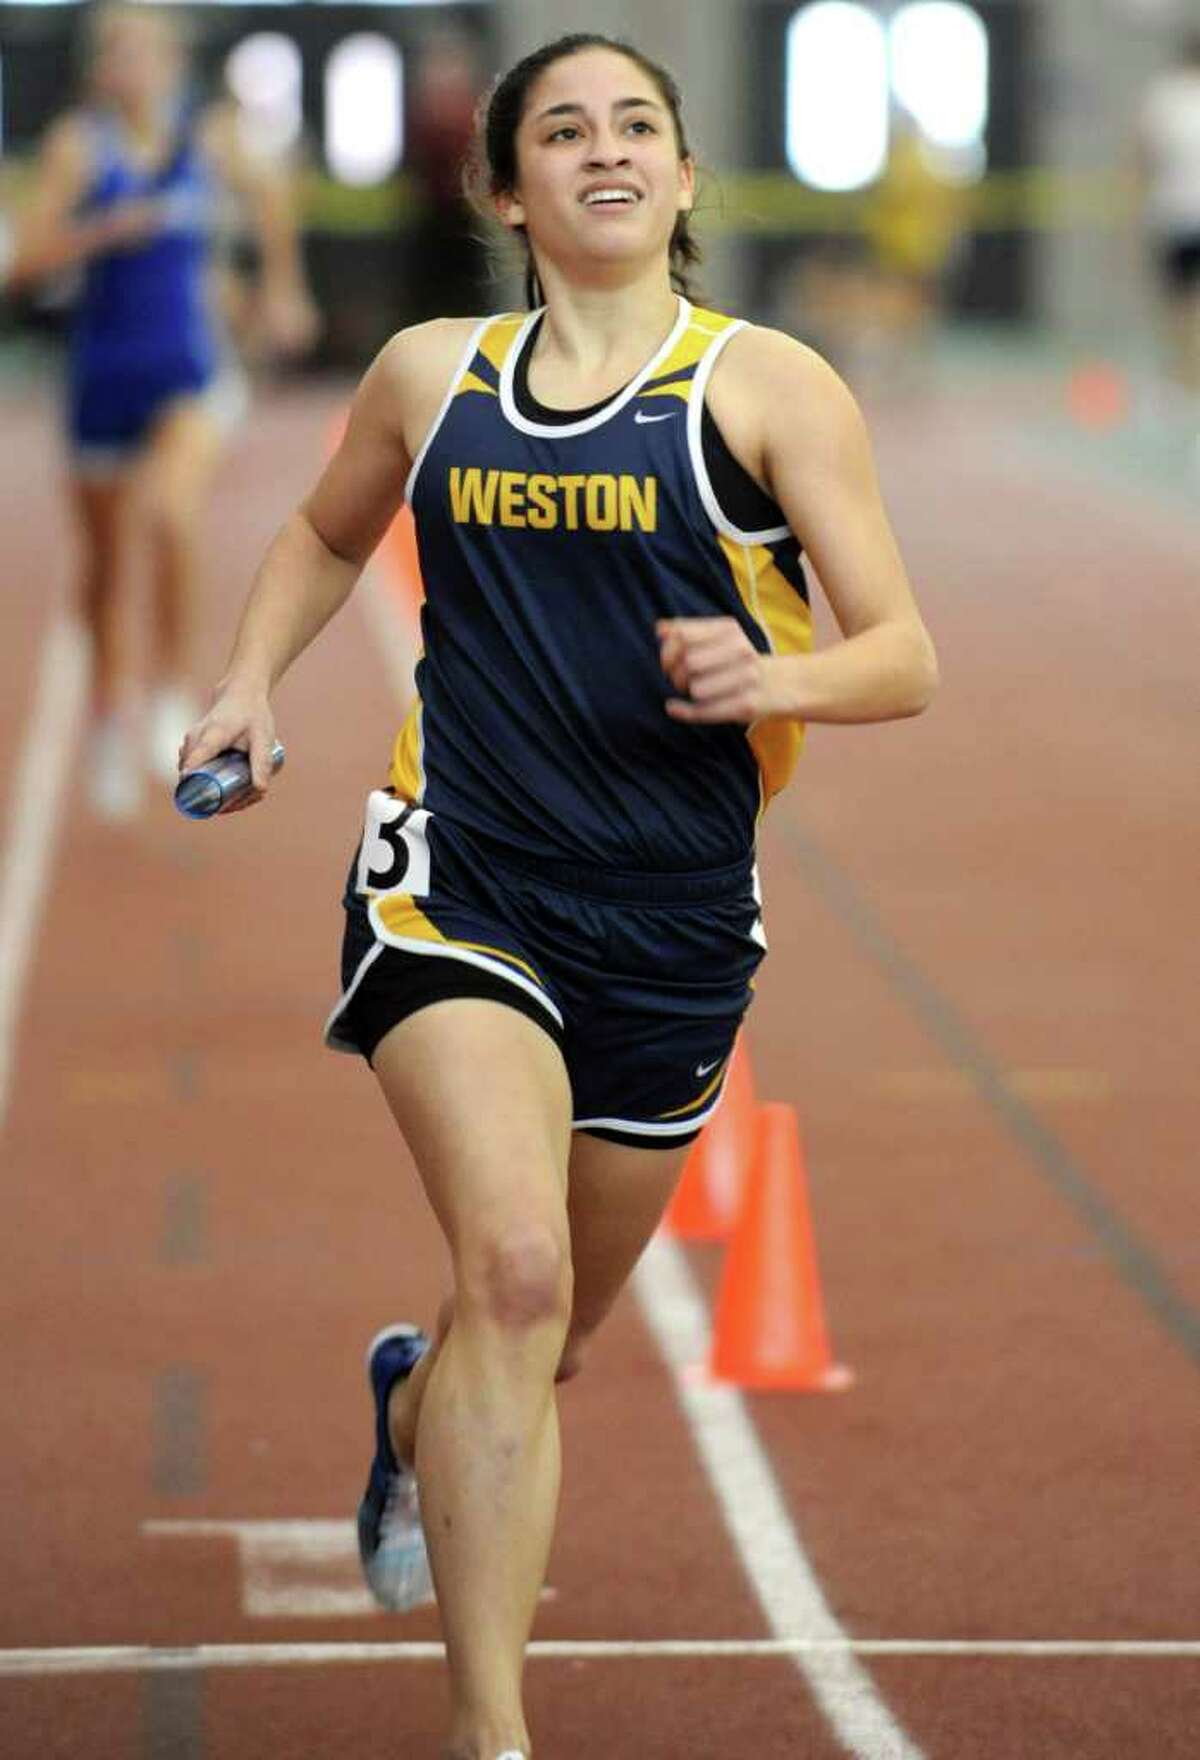 Kara Bucaro competes in the girls sprint medley relay race for Weston at the Class M championships. Bucaro anchored the sprint medley relay team to success by running the 800-meter leg and begins training camp Sunday with Towson State University's cross country team.